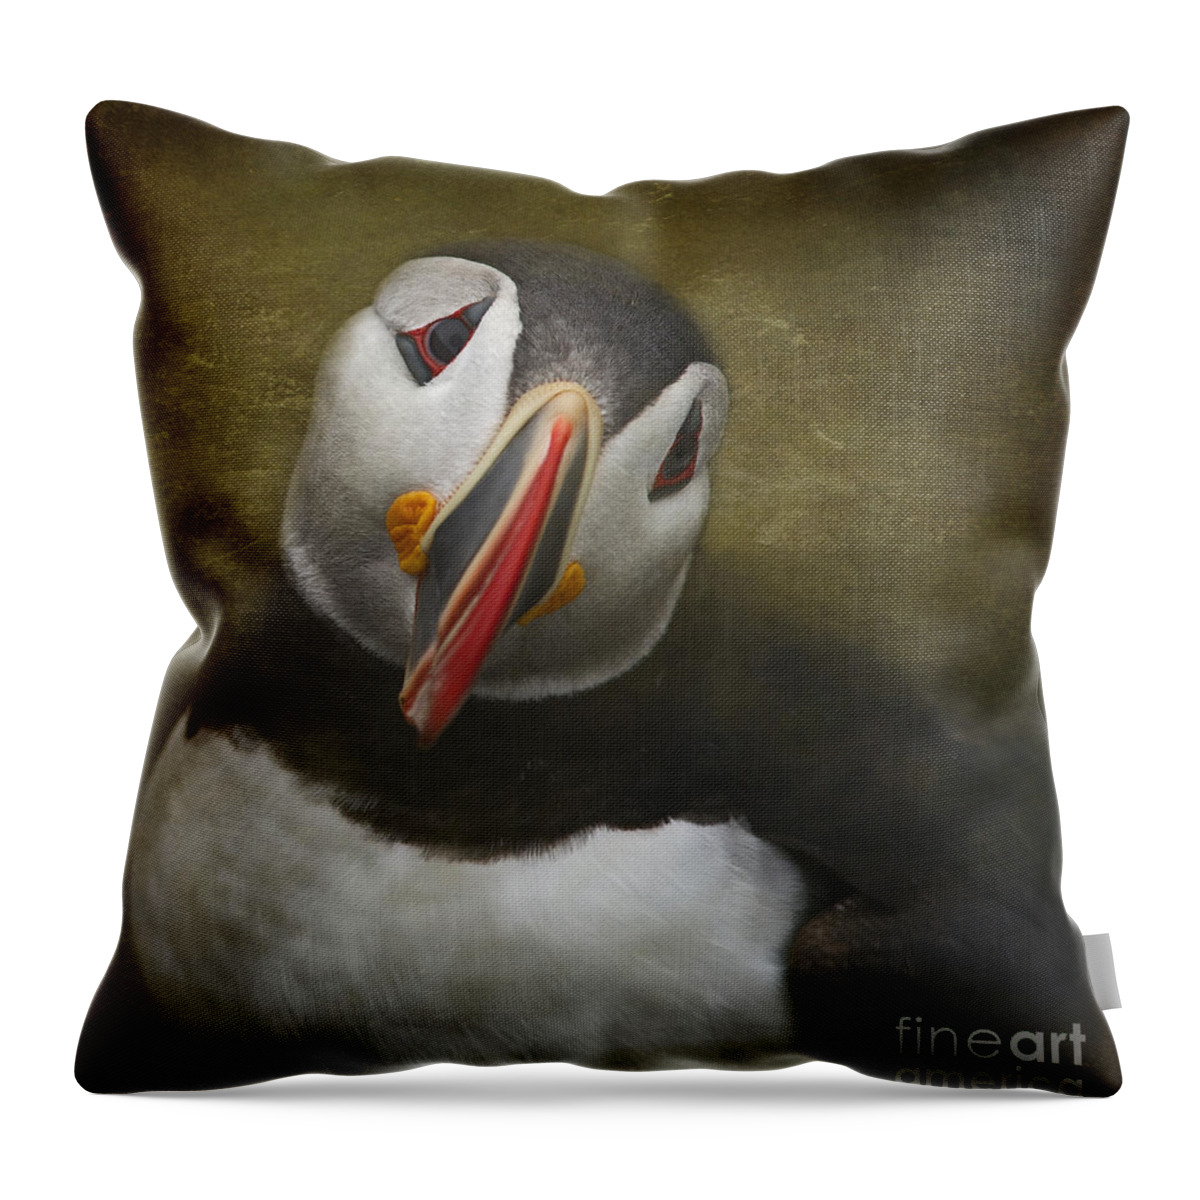 Festblues Throw Pillow featuring the photograph A Portrait of the Clown of the Sea by Nina Stavlund